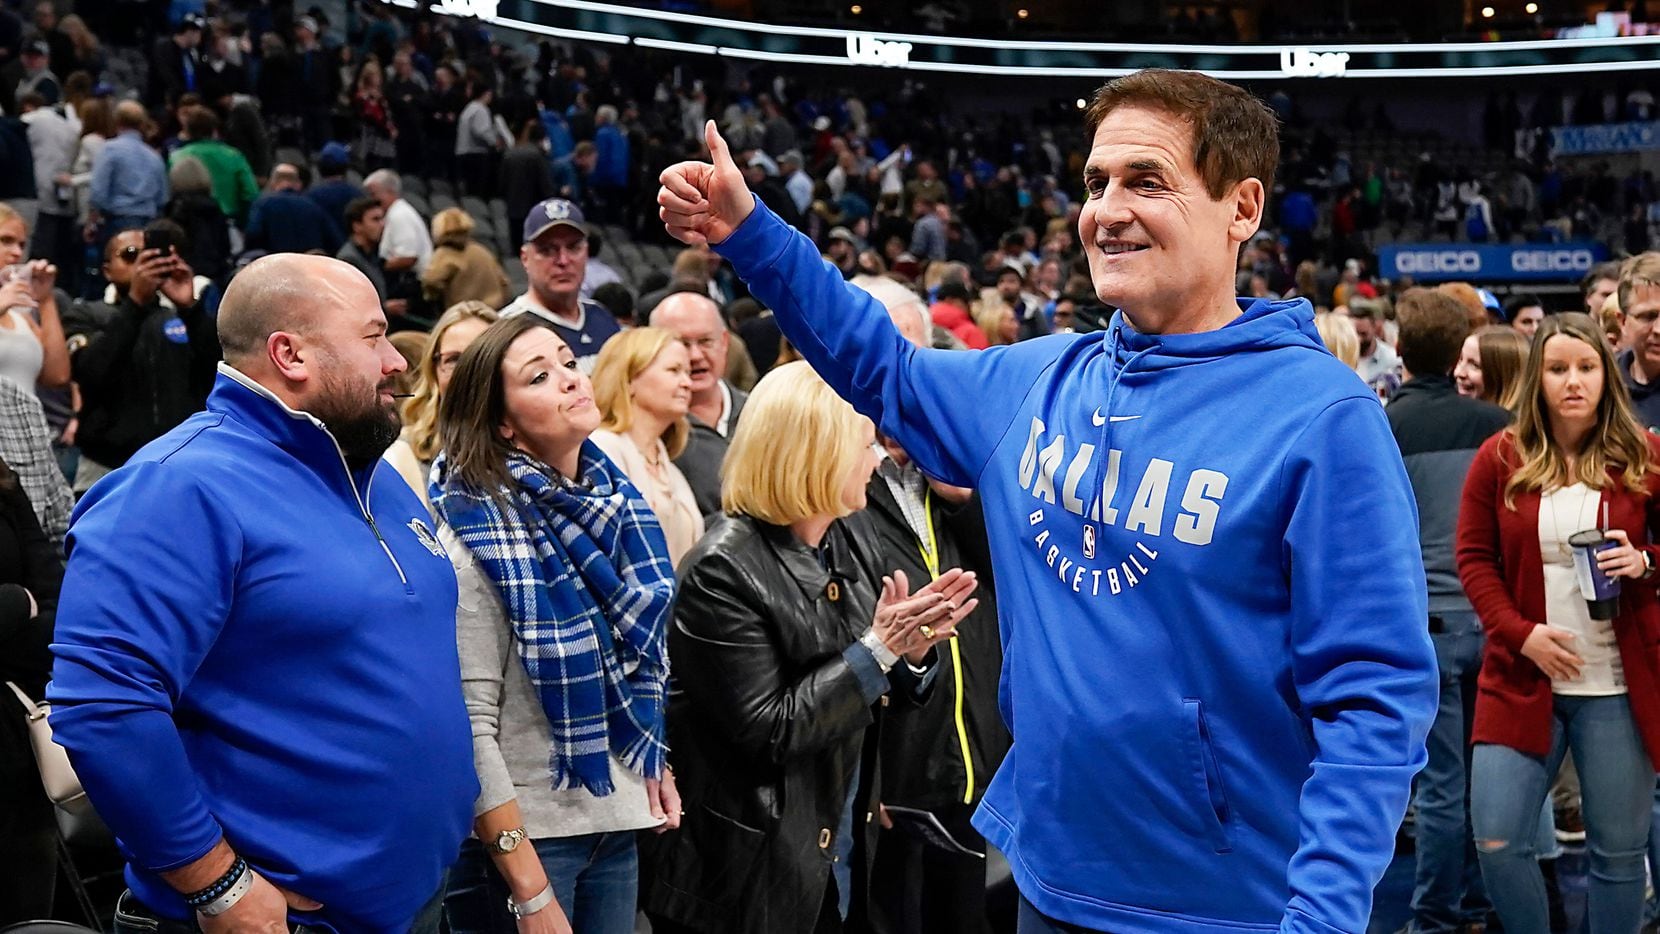 Dallas Mavericks owner Mark Cuban gives a thumbs up to the crowd as he leaves the court after a victory over the Toronto Raptors in an NBA basketball game at American Airlines Center on Saturday, Nov. 16, 2019, in Dallas.